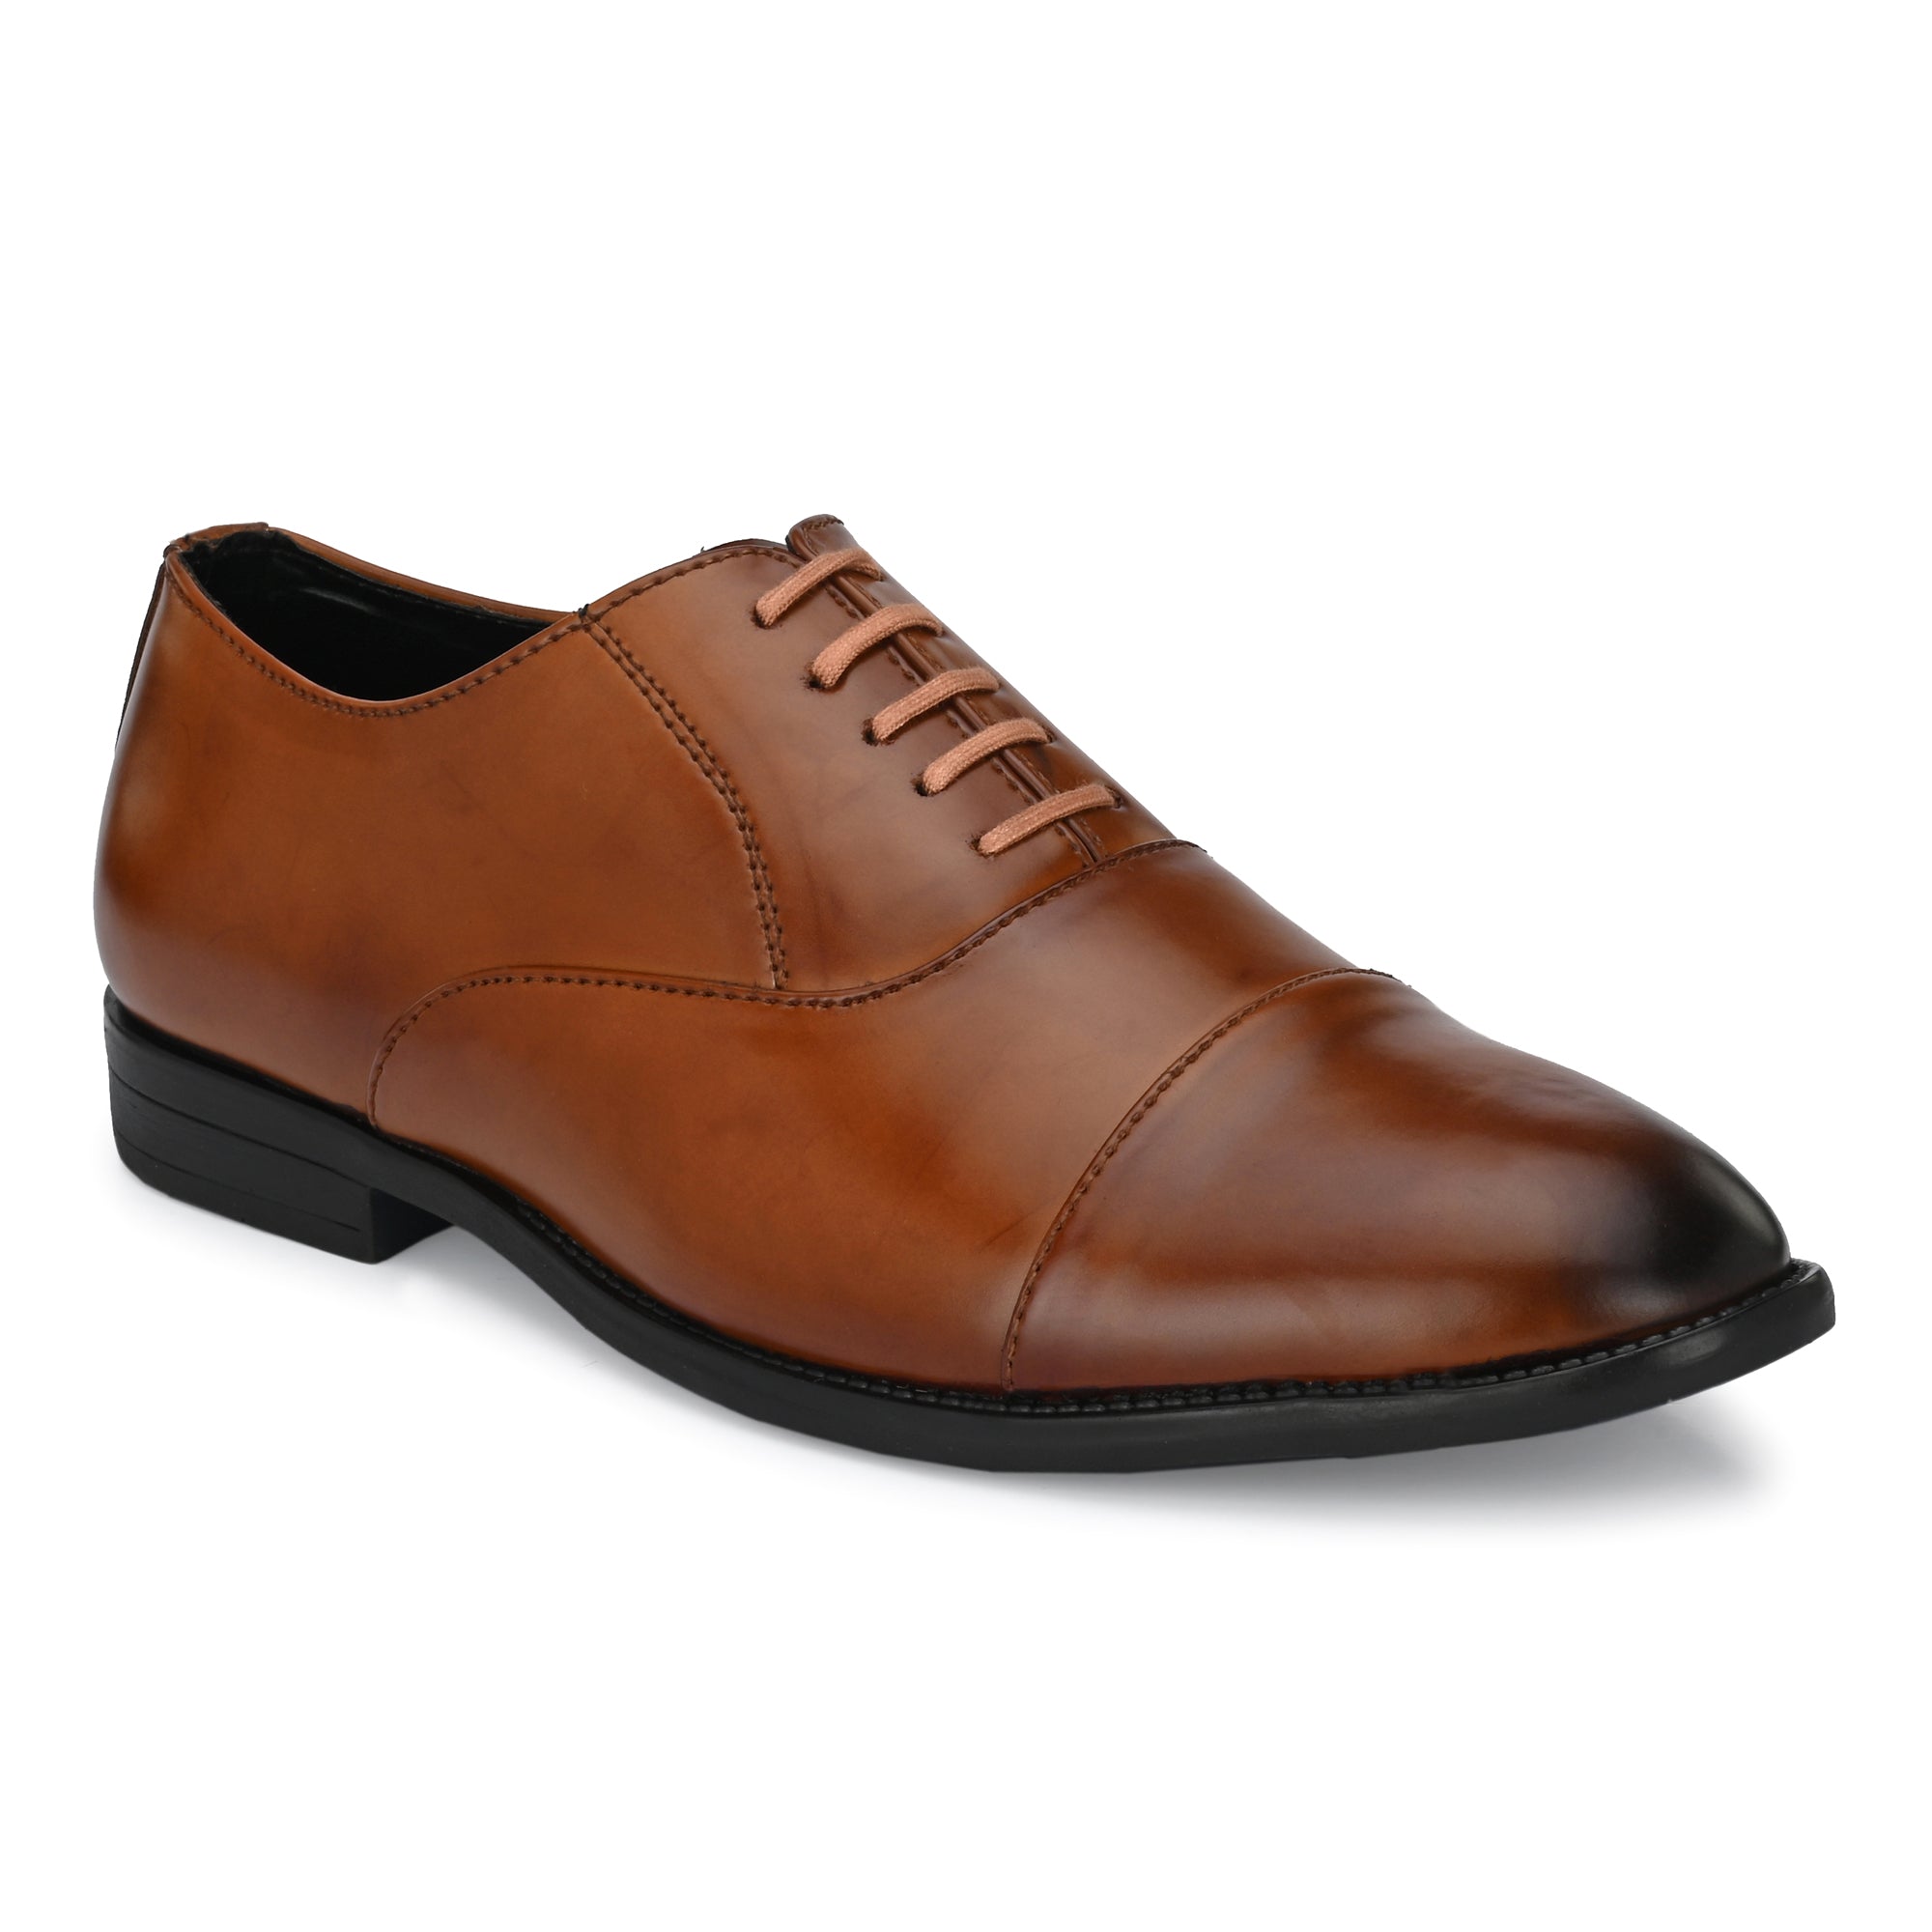 Attitudist Handcrafted Oxford Tan Plain Formal Laceup Derby Shoes With Cap Toe For Men MTOBSF